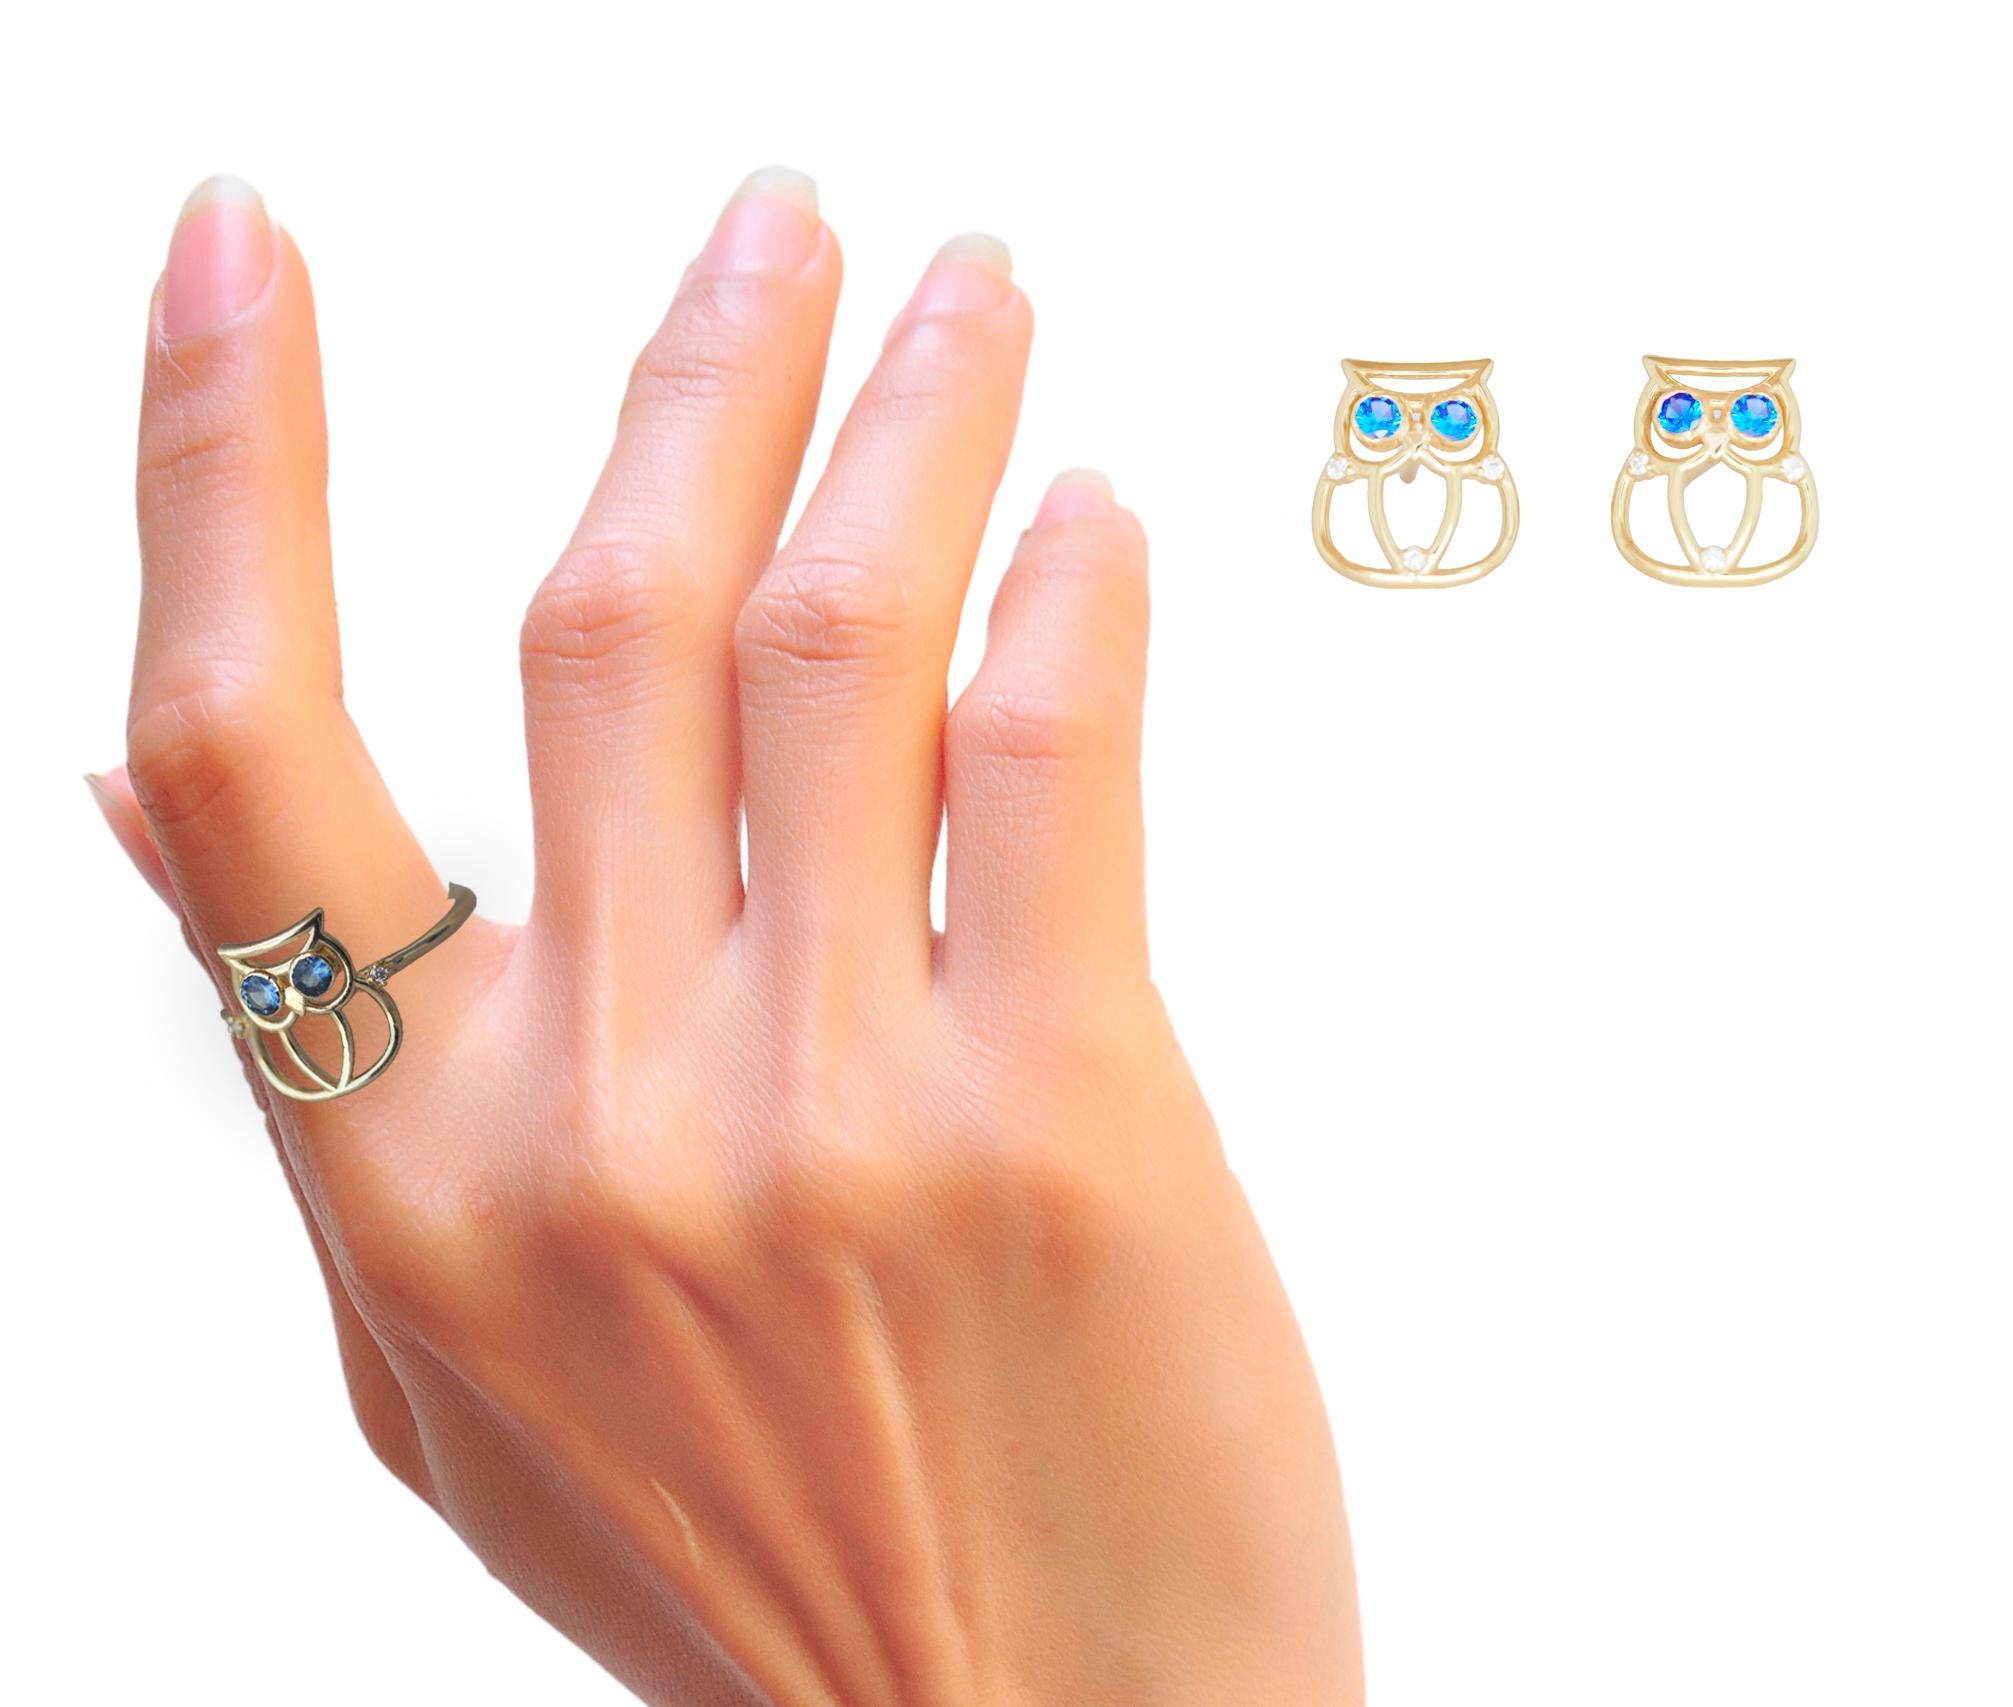 Modern Owl earrings and ring set in 14k gold.  For Sale